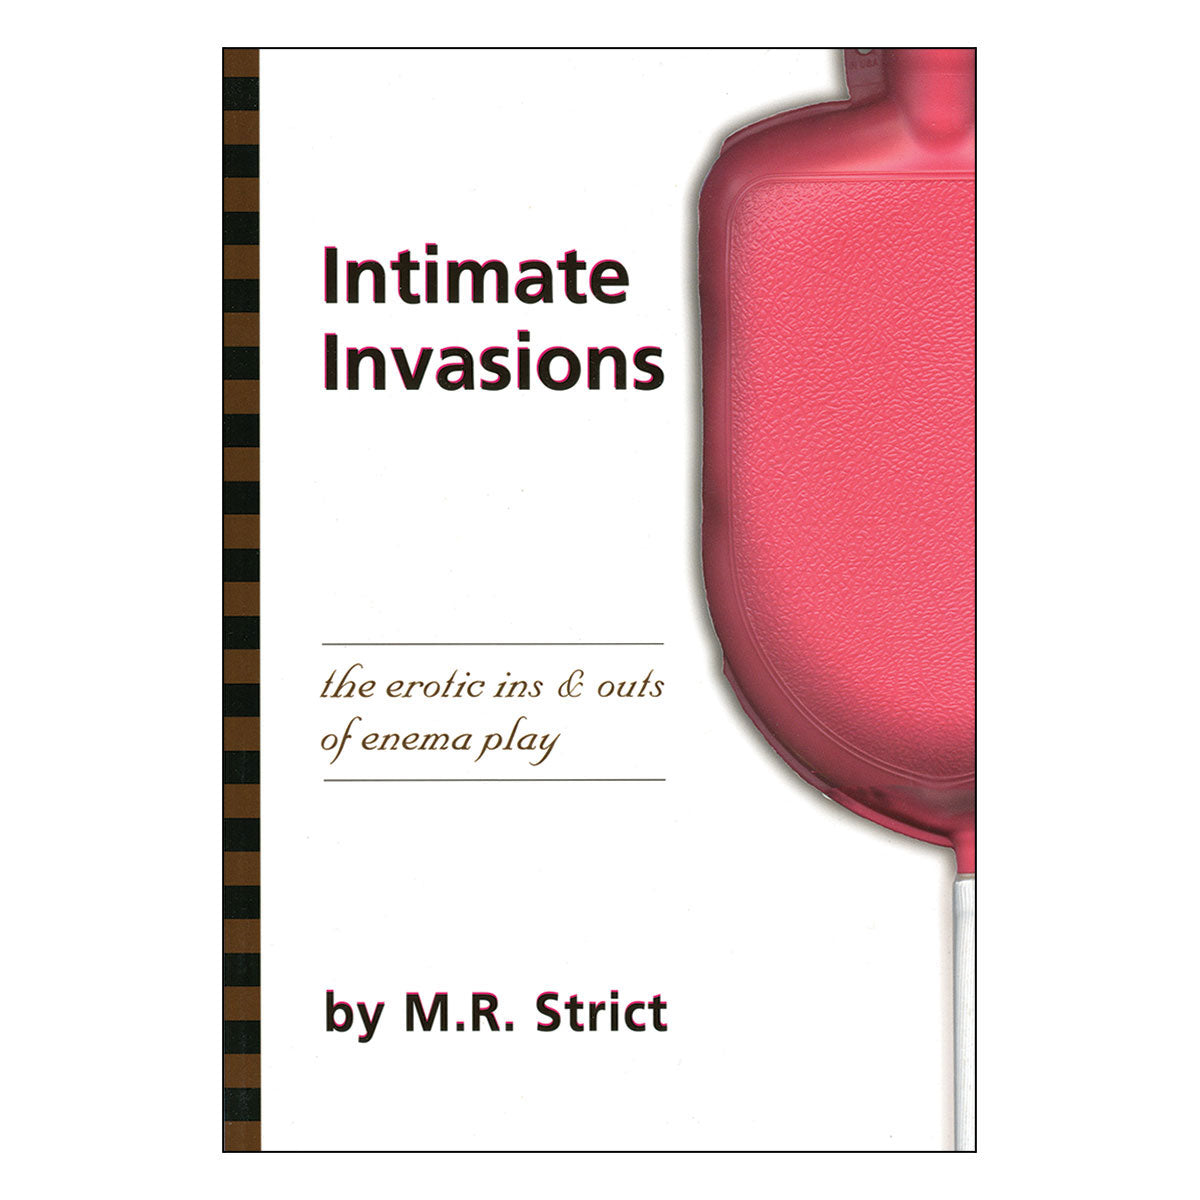 Intimate Invasions - The Erotic Ins & Outs of Enema Play - Greenery Press